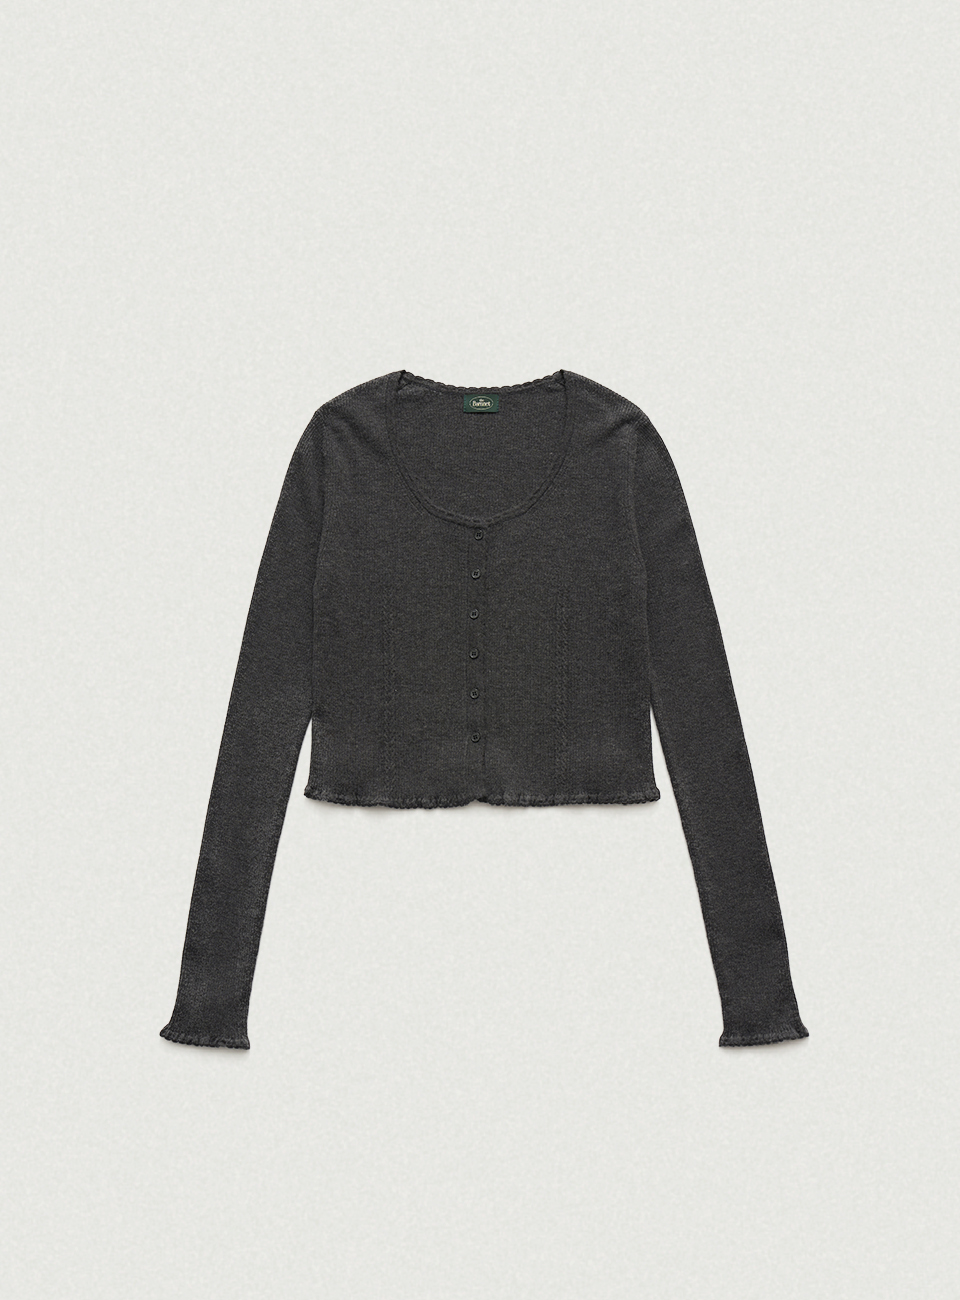 Charcoal Scallop Cropped Knit Cardigan